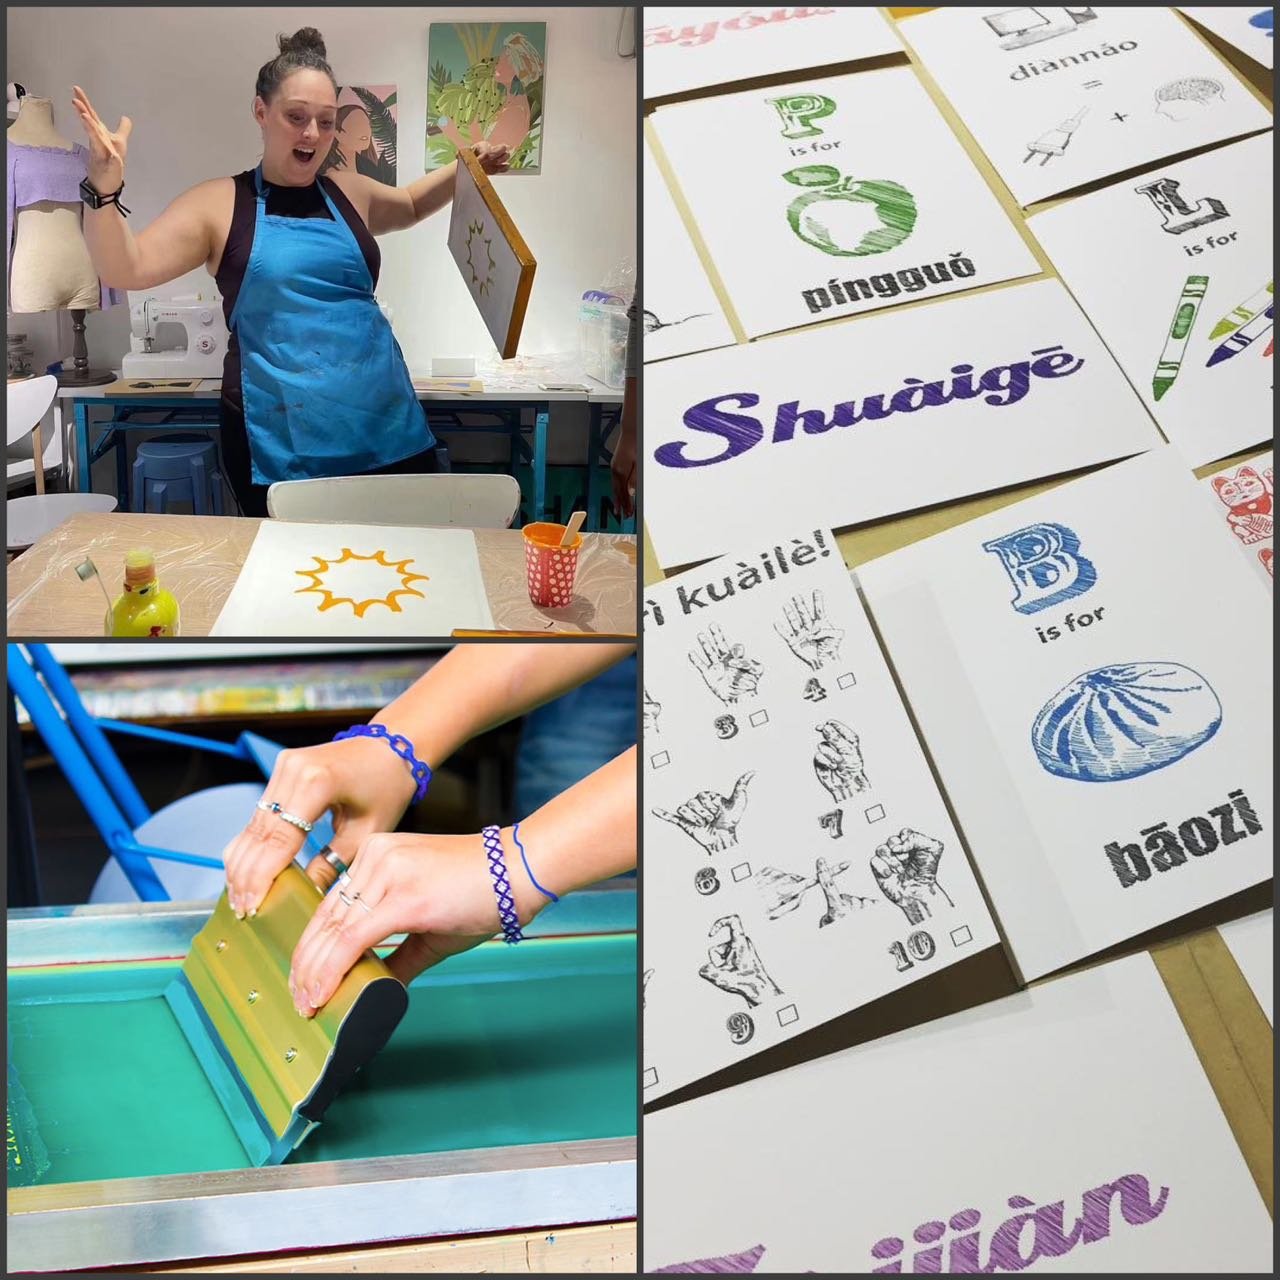 Barbara Poppell's best purchase in China: The experience of doing her own screen-printing with Sarah from Pinyin Press.